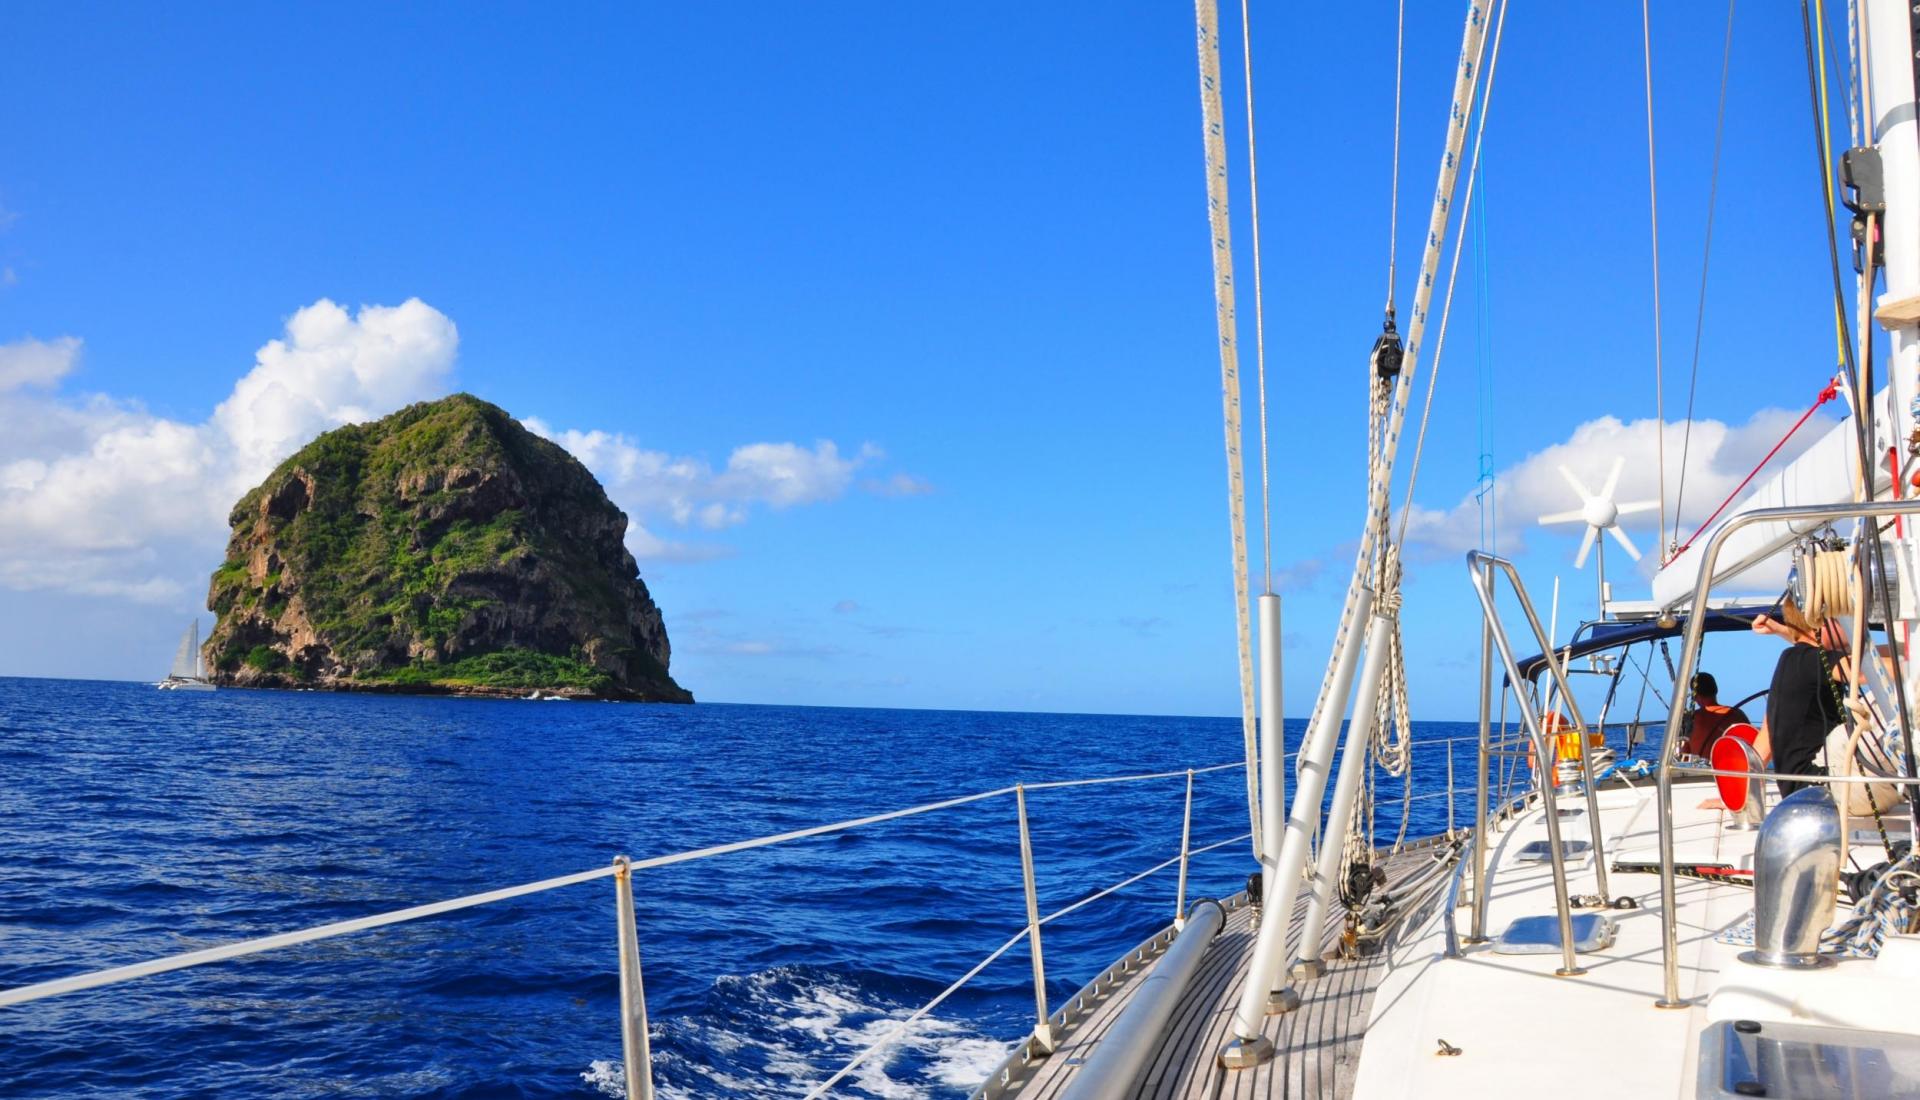 Sailing around the Caribbean: Your Week Long Itinerary